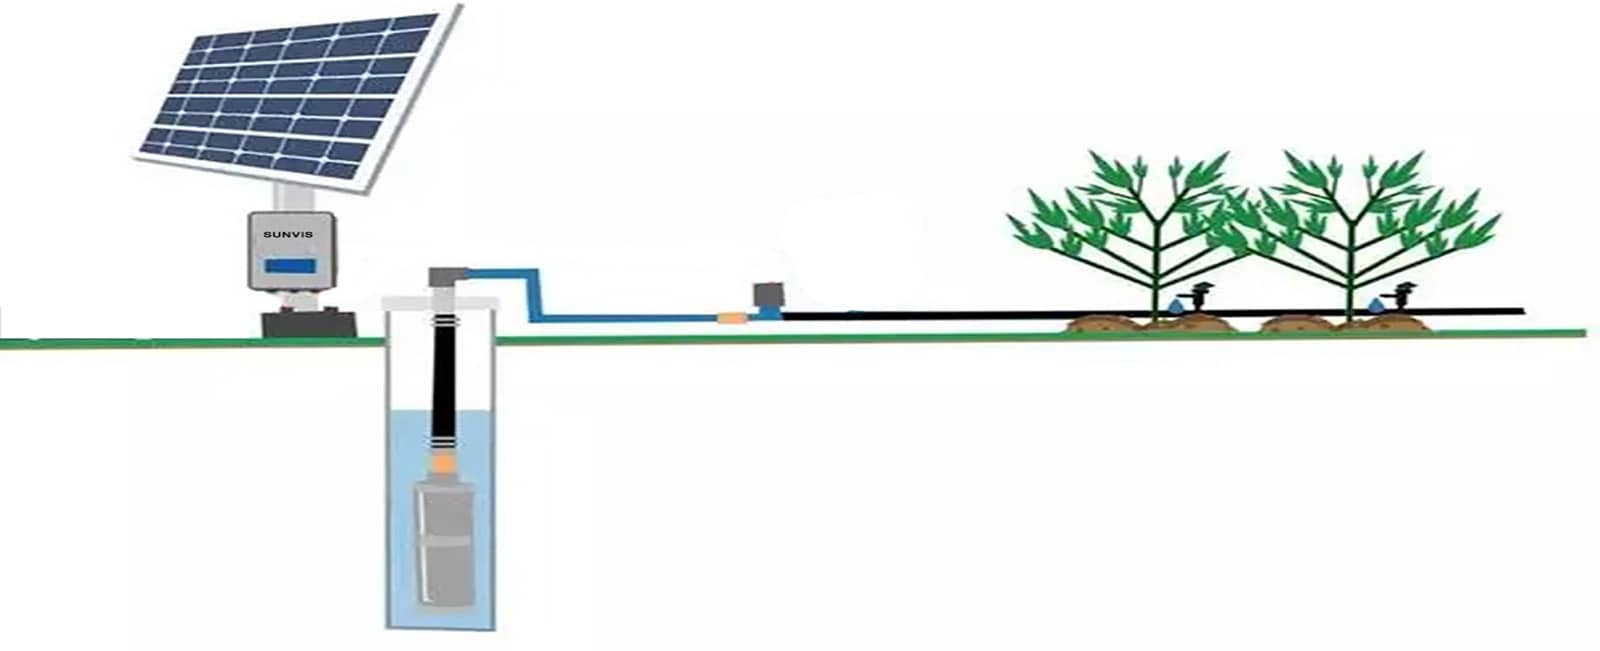 solar pump direct irrigation through water pipes 2